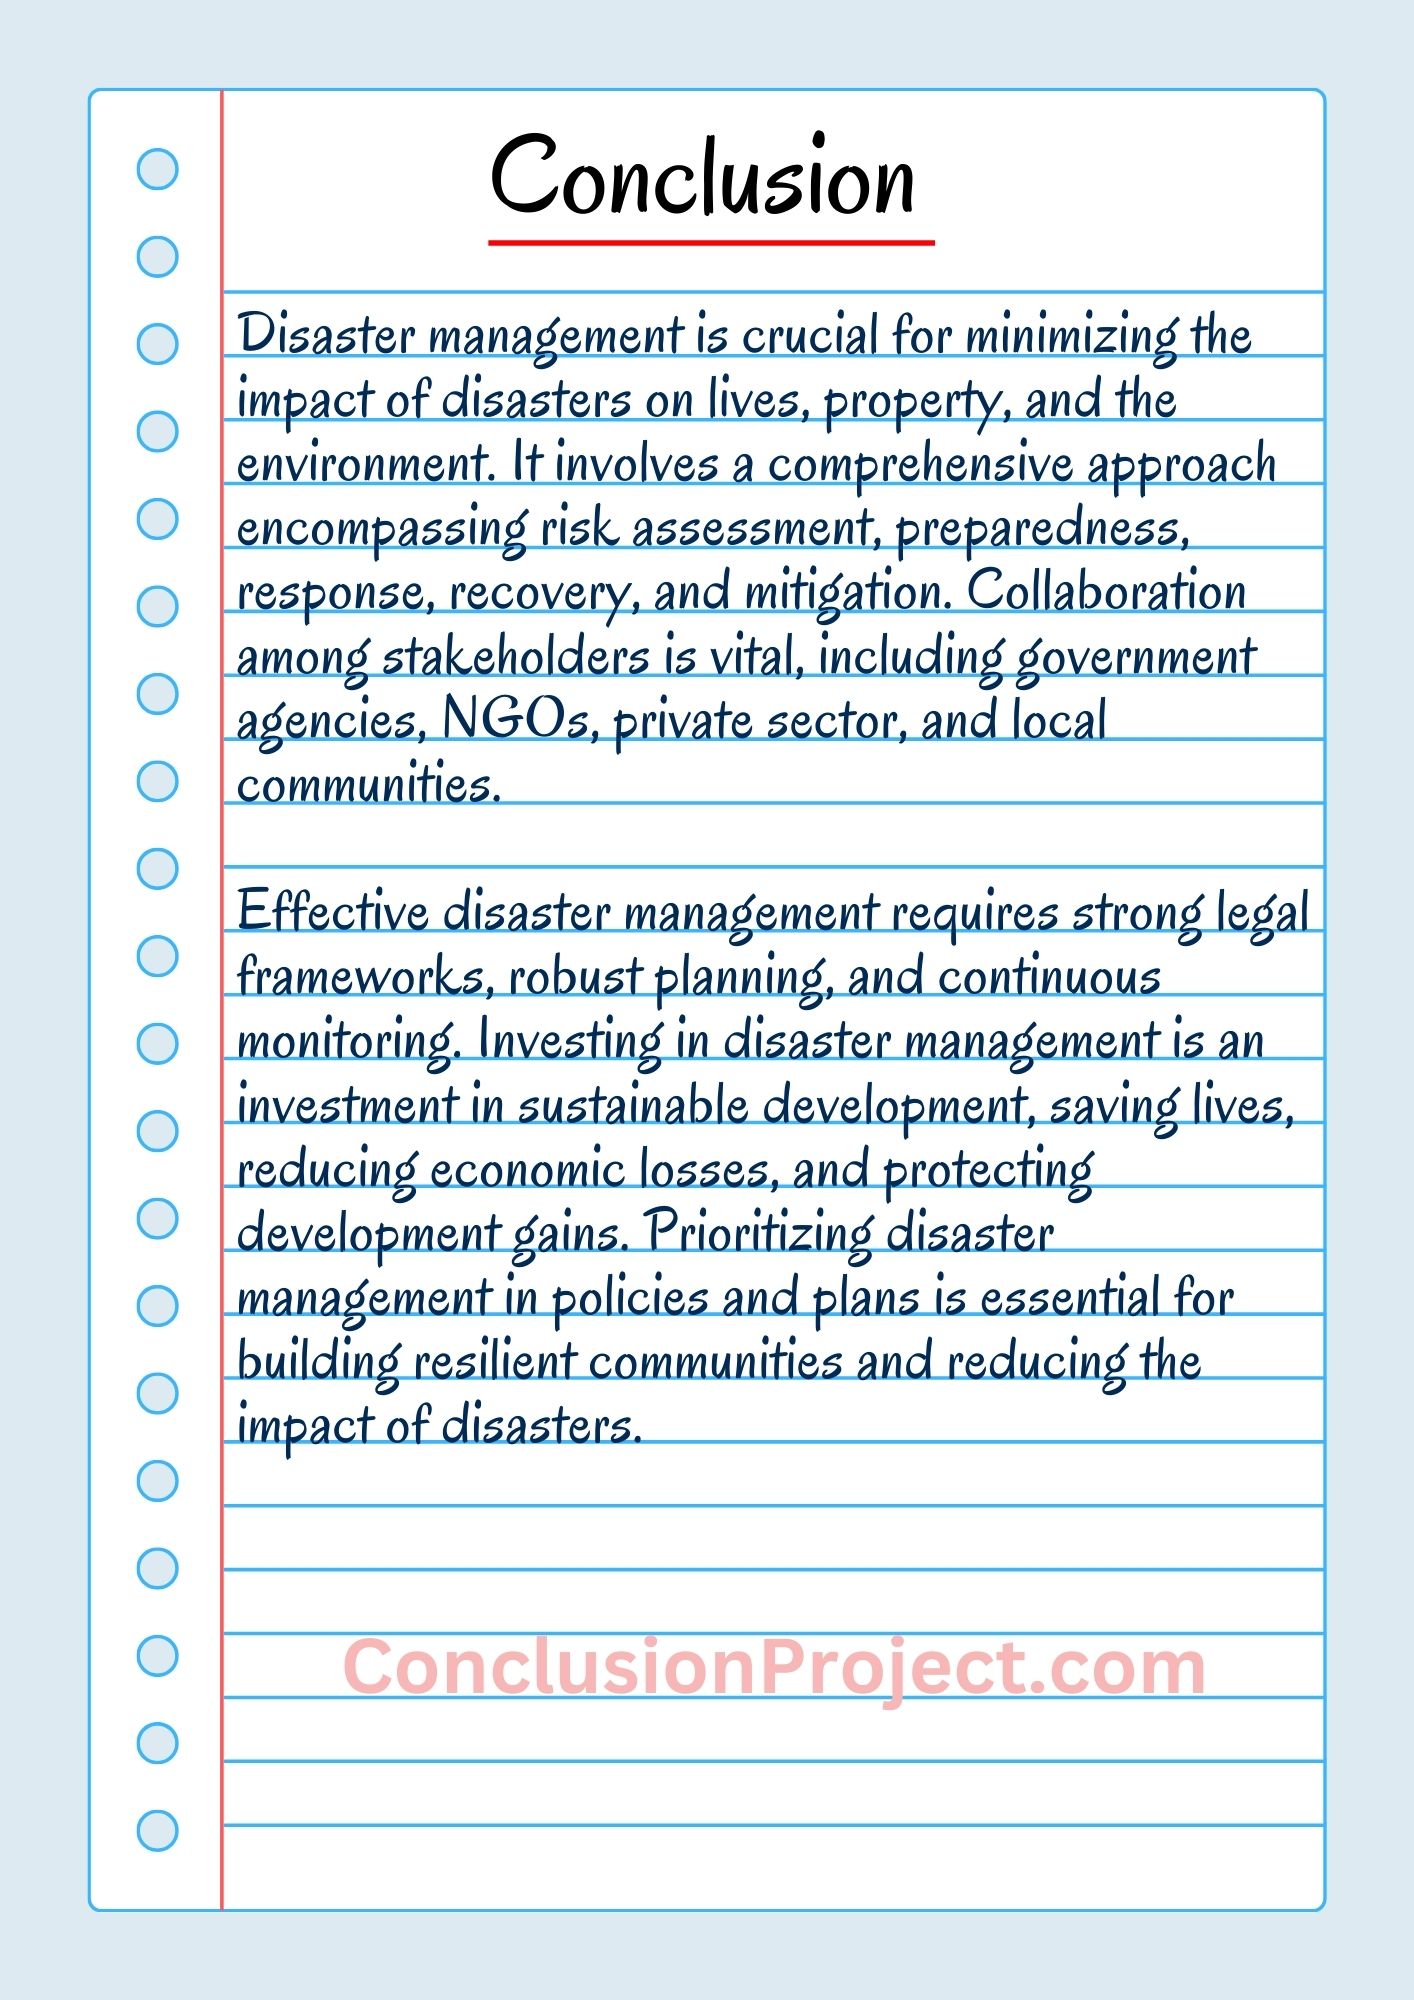 Conclusion of Disaster Management